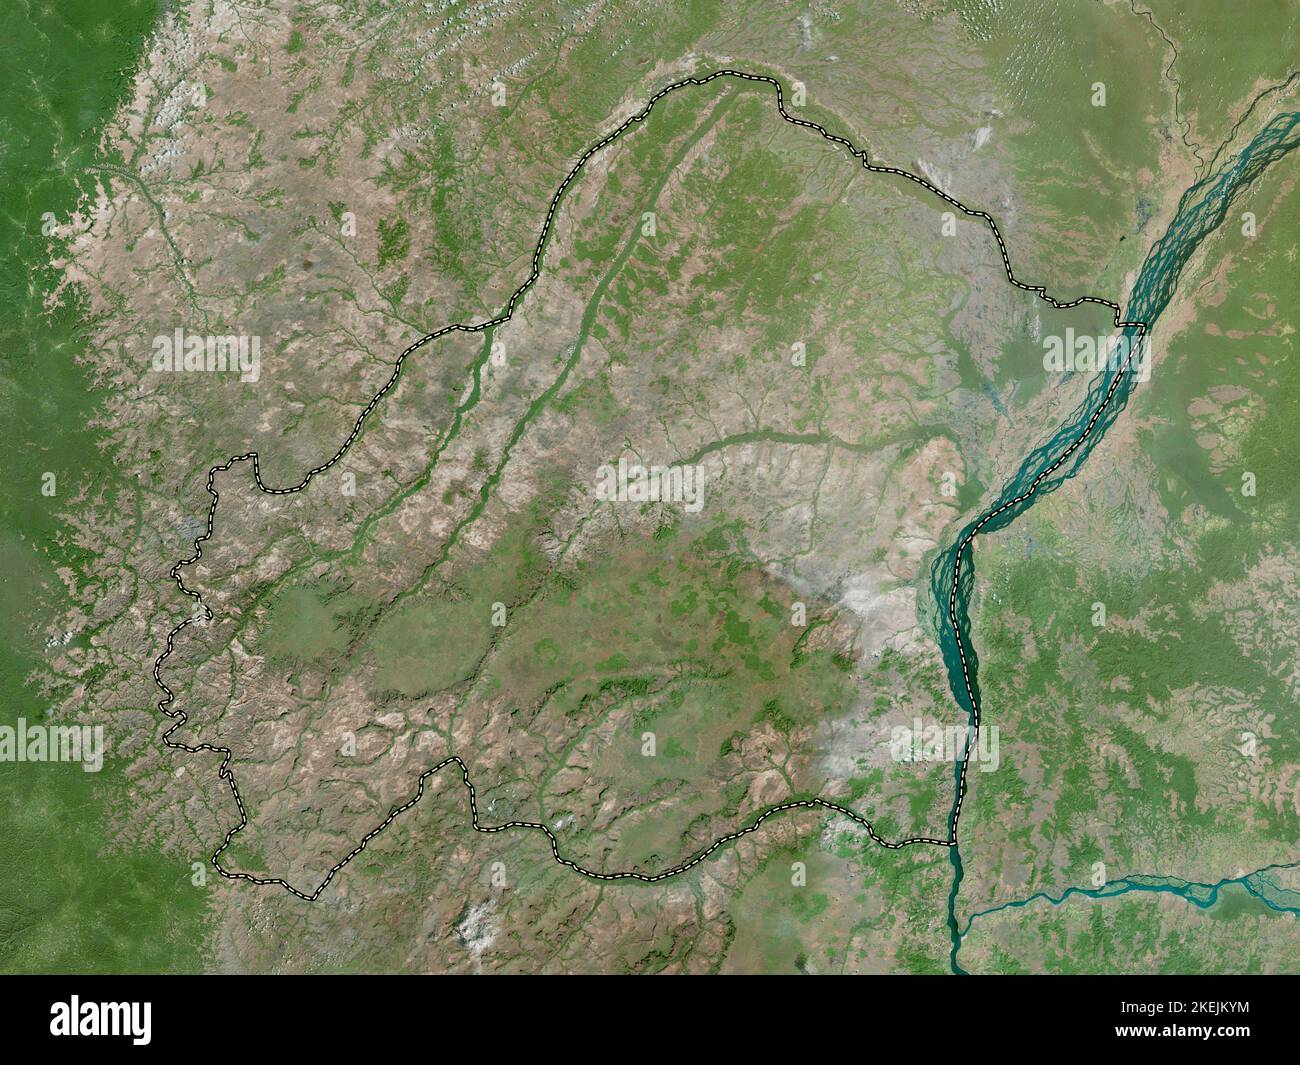 Plateaux, region of Republic of Congo. High resolution satellite map Stock Photo